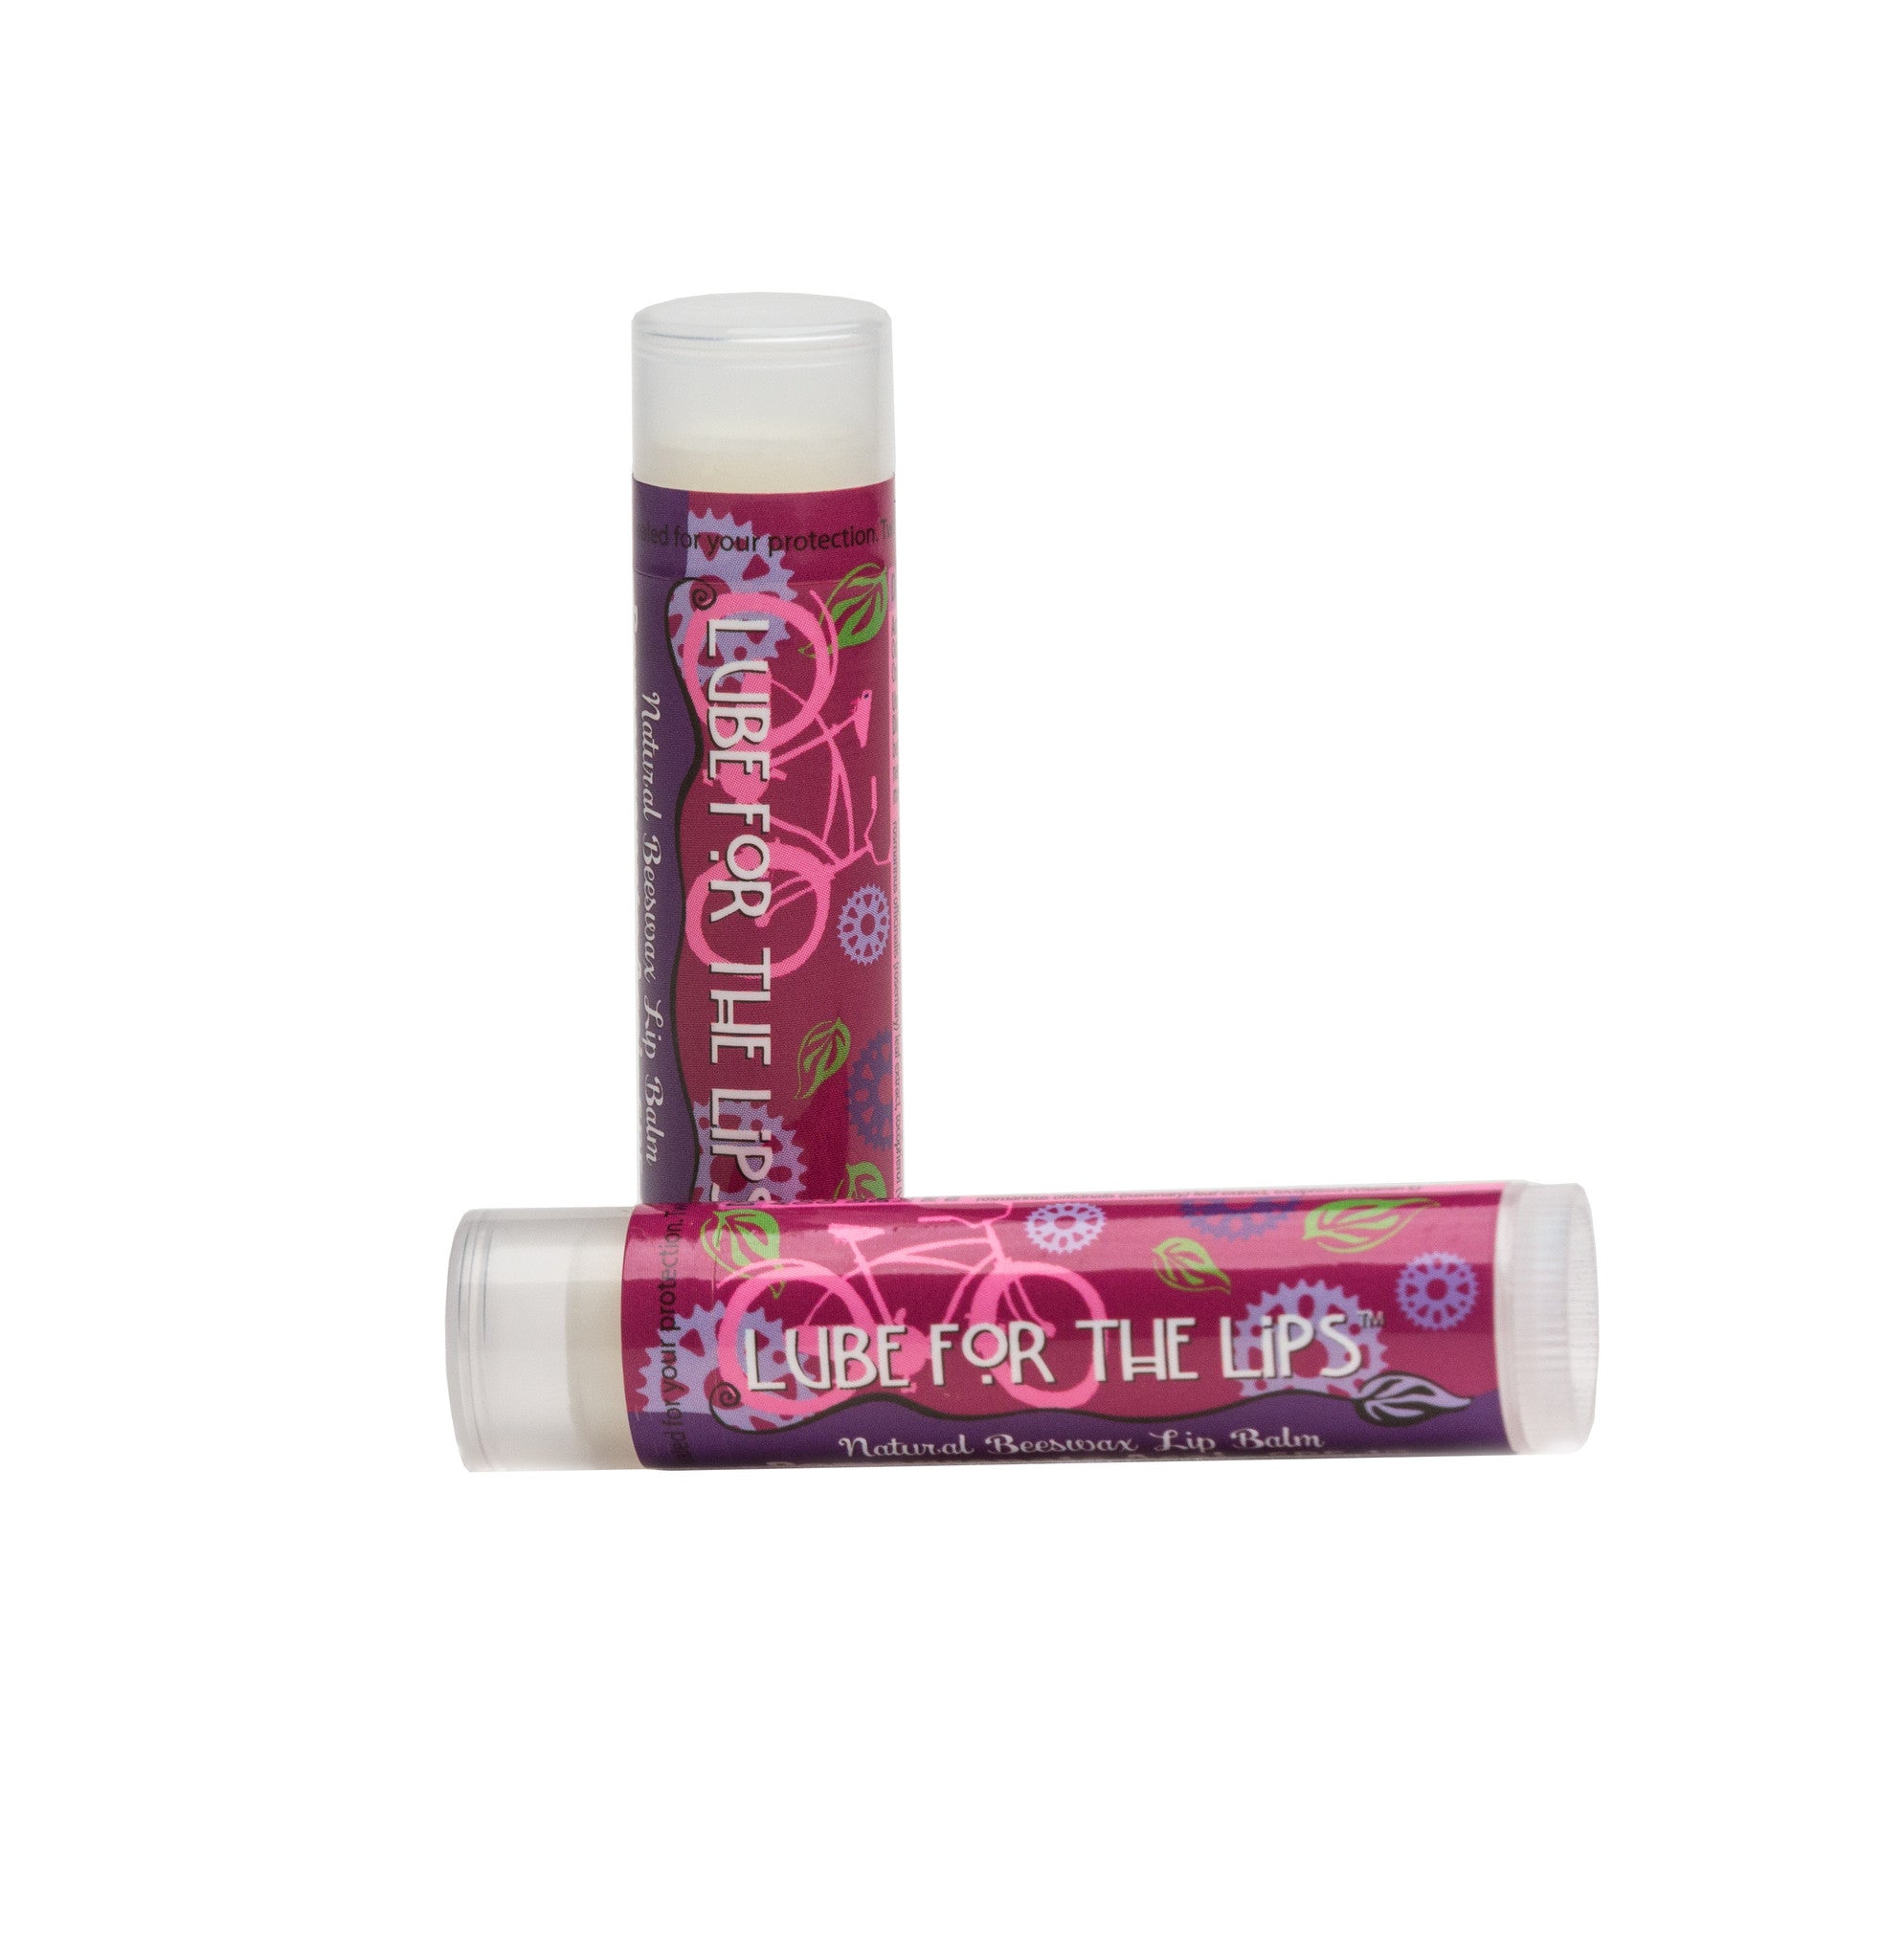 POMEGRANATE ACAI SPF 15 LUBE FOR THE LIPS™